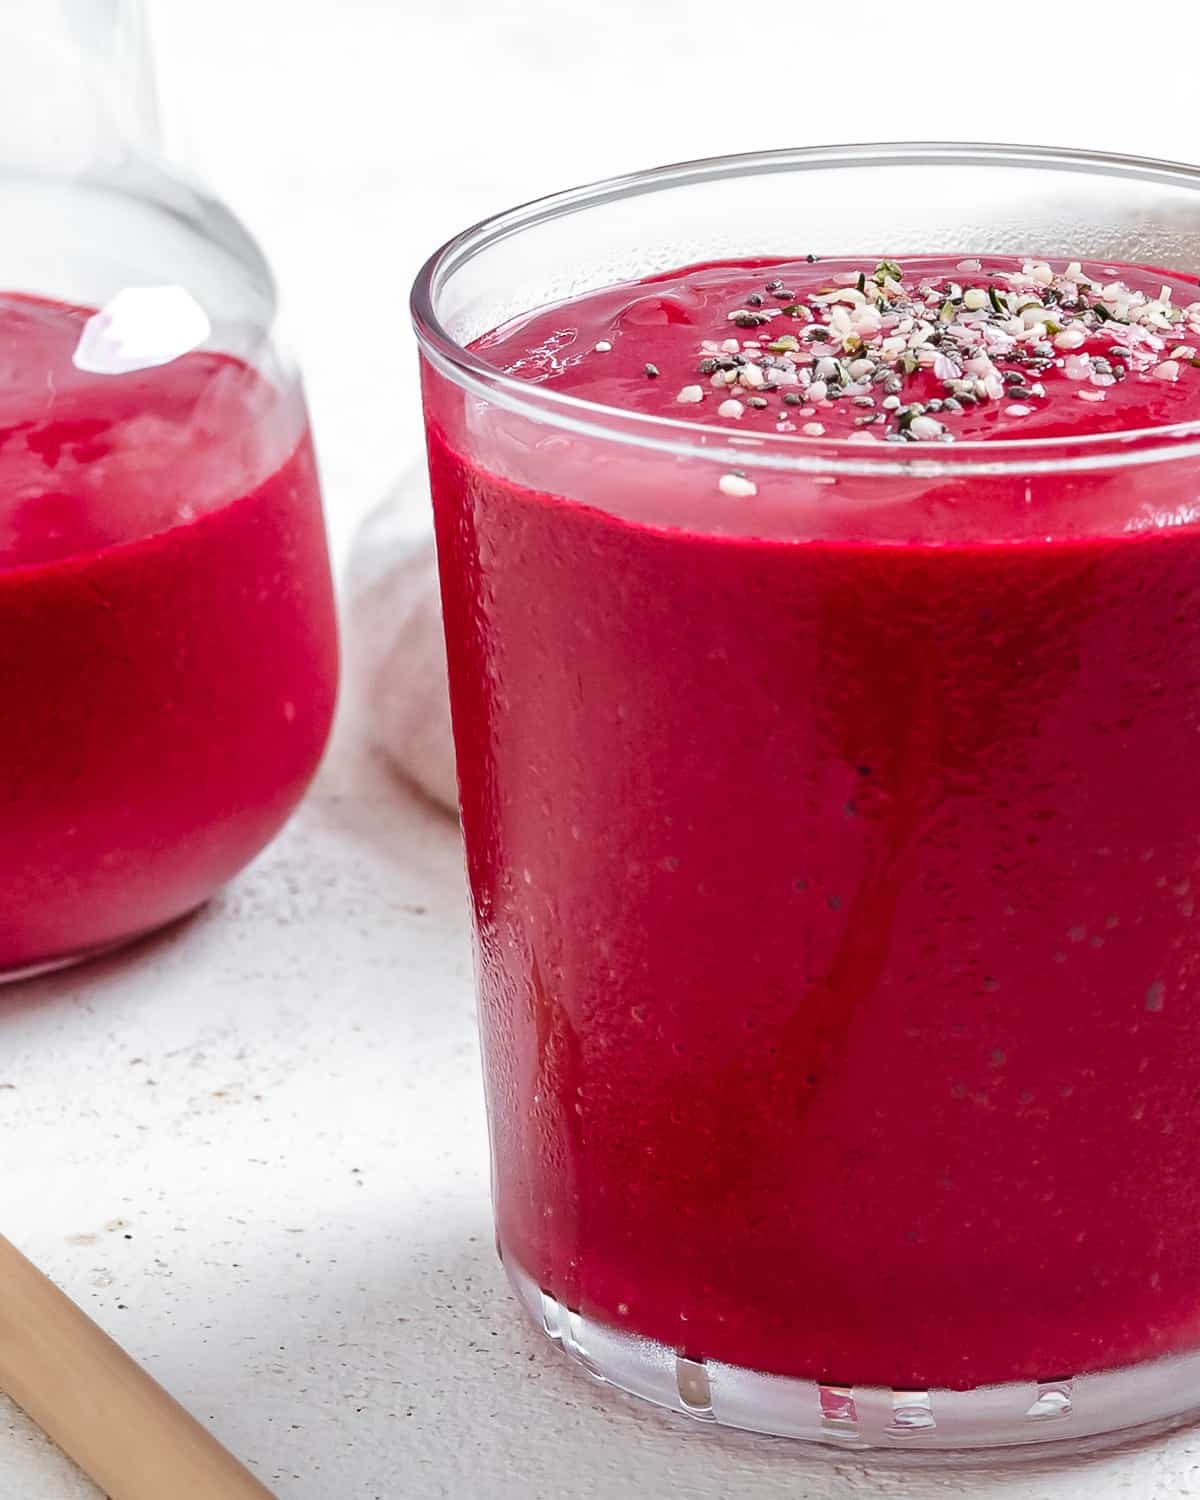 two completed Banana Beet Smoothies in a glass cup against a light background